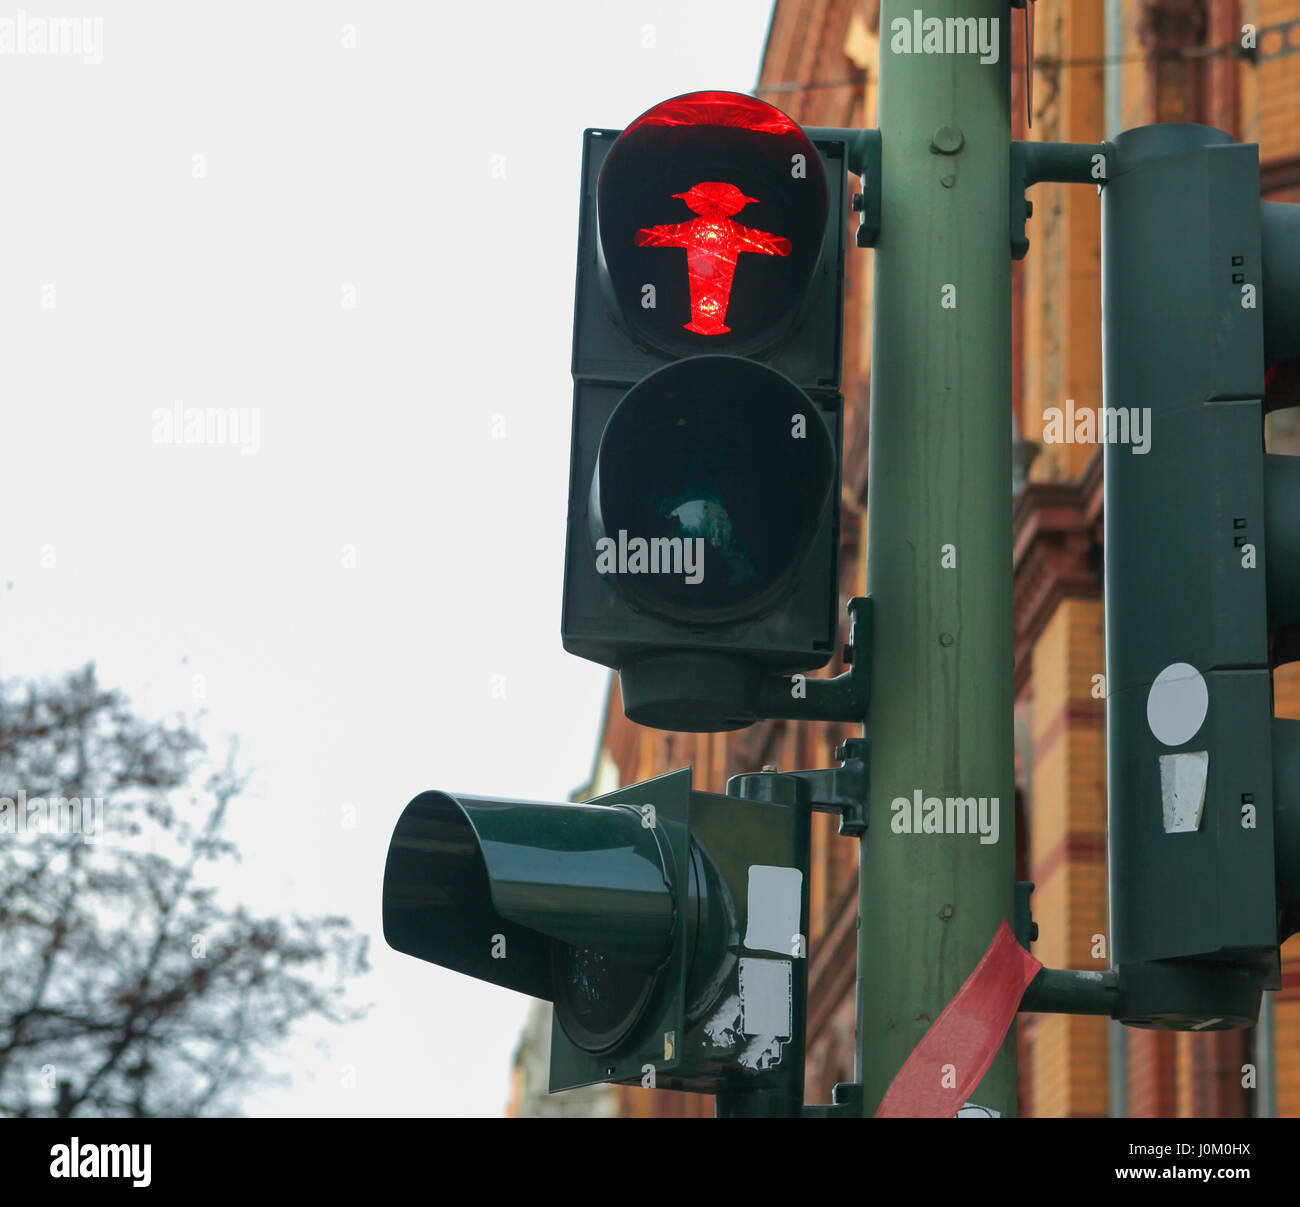 Traffic light on red in East Berlin Stock Photo